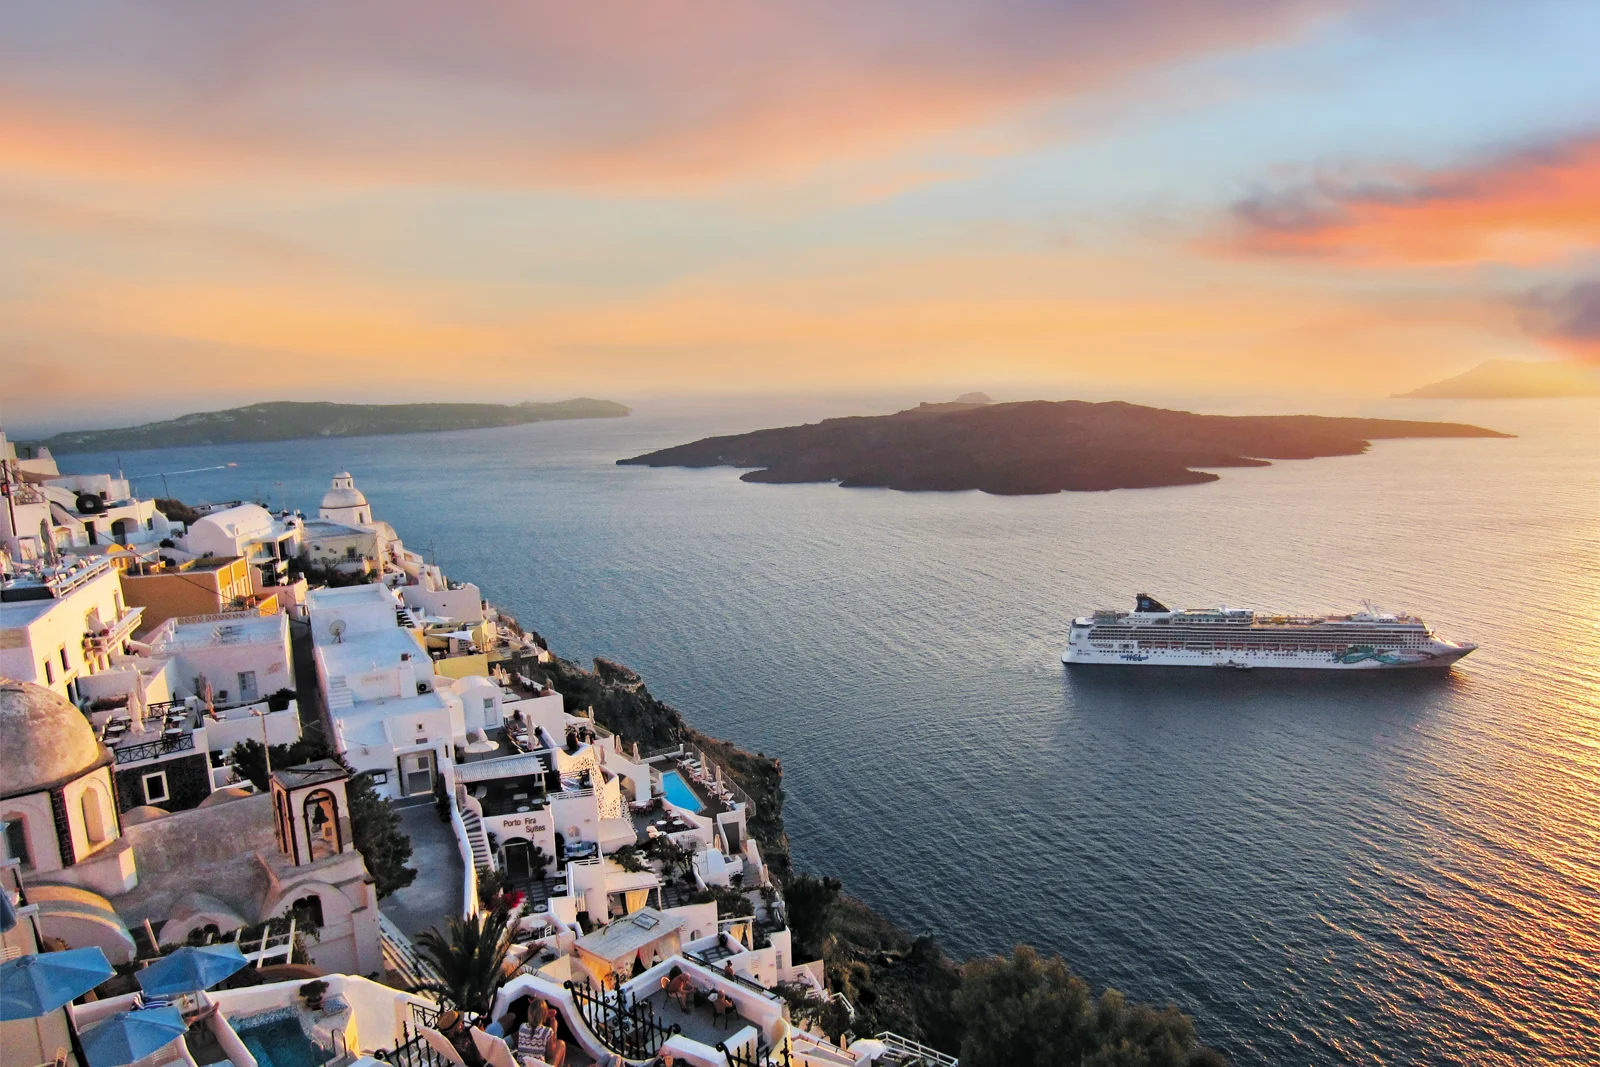 11 excursions on cruise ships to avoid.